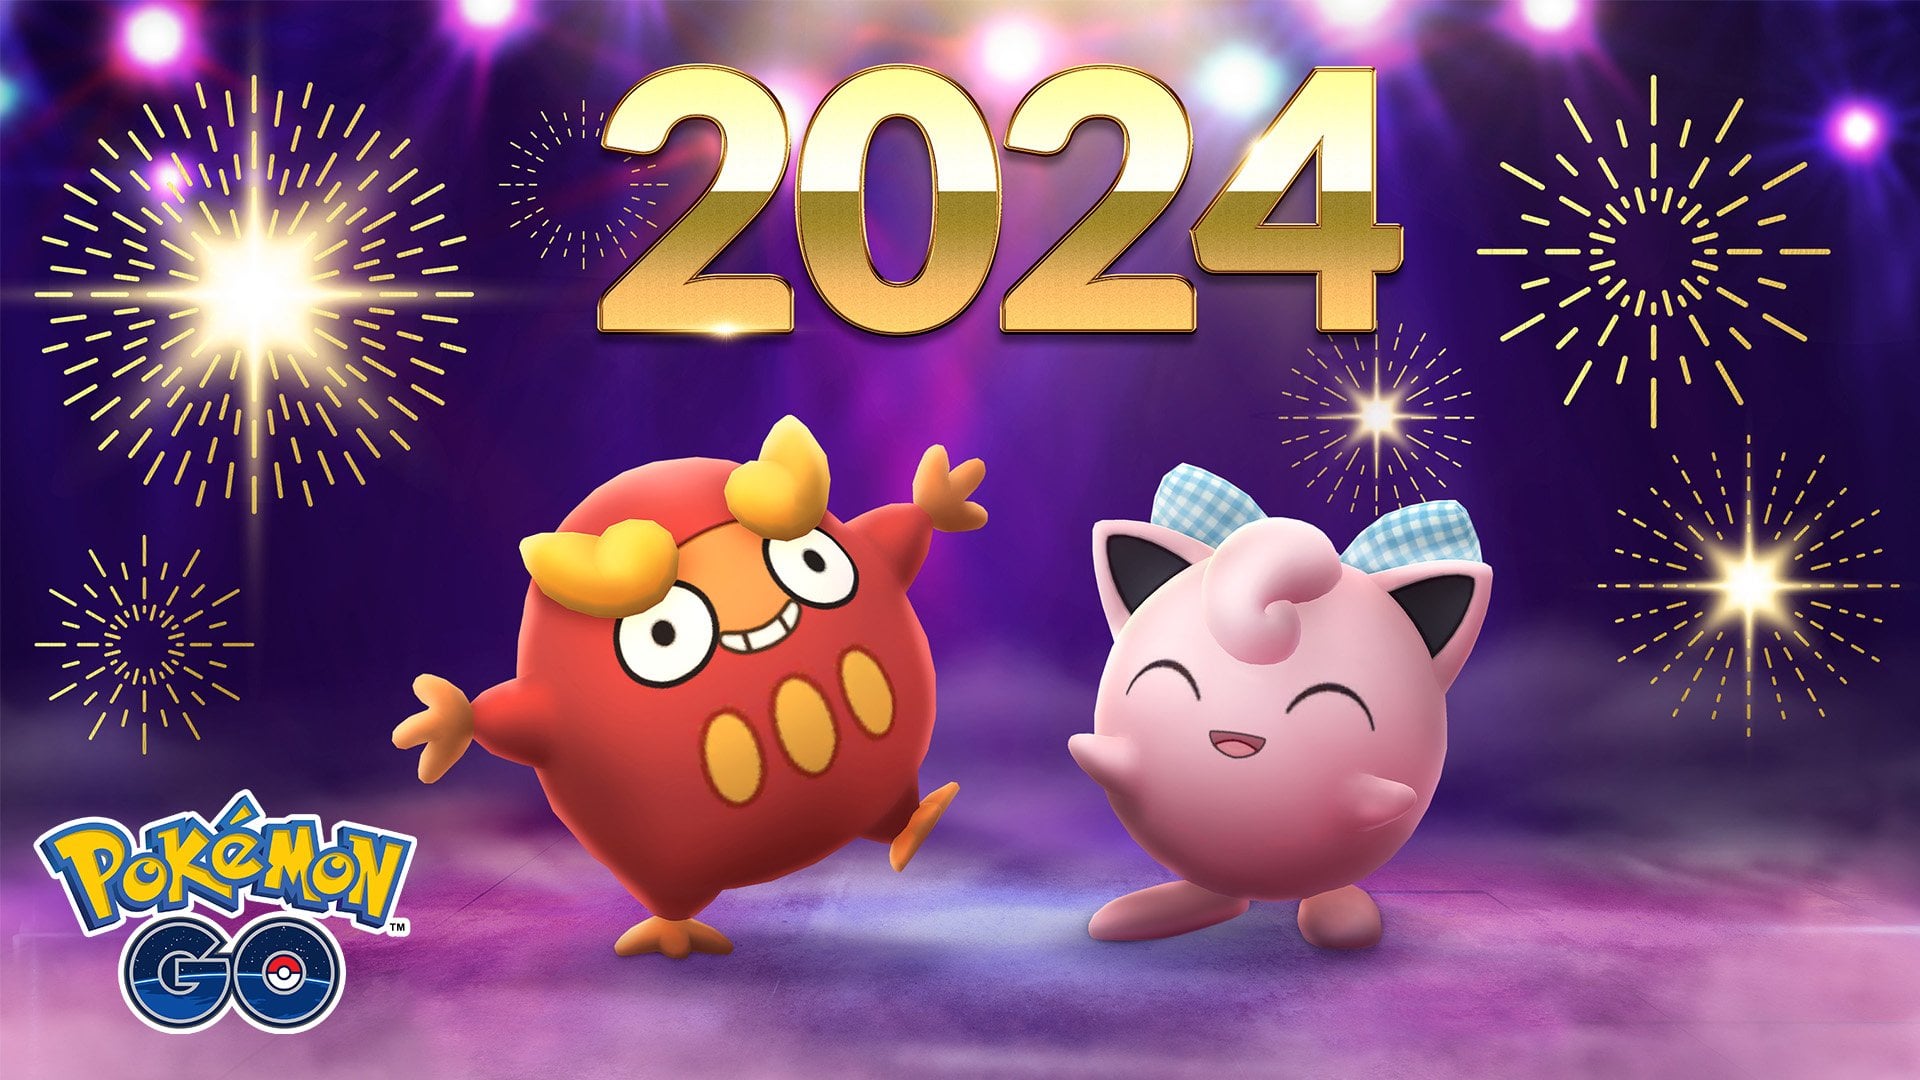 2024 with a grand event